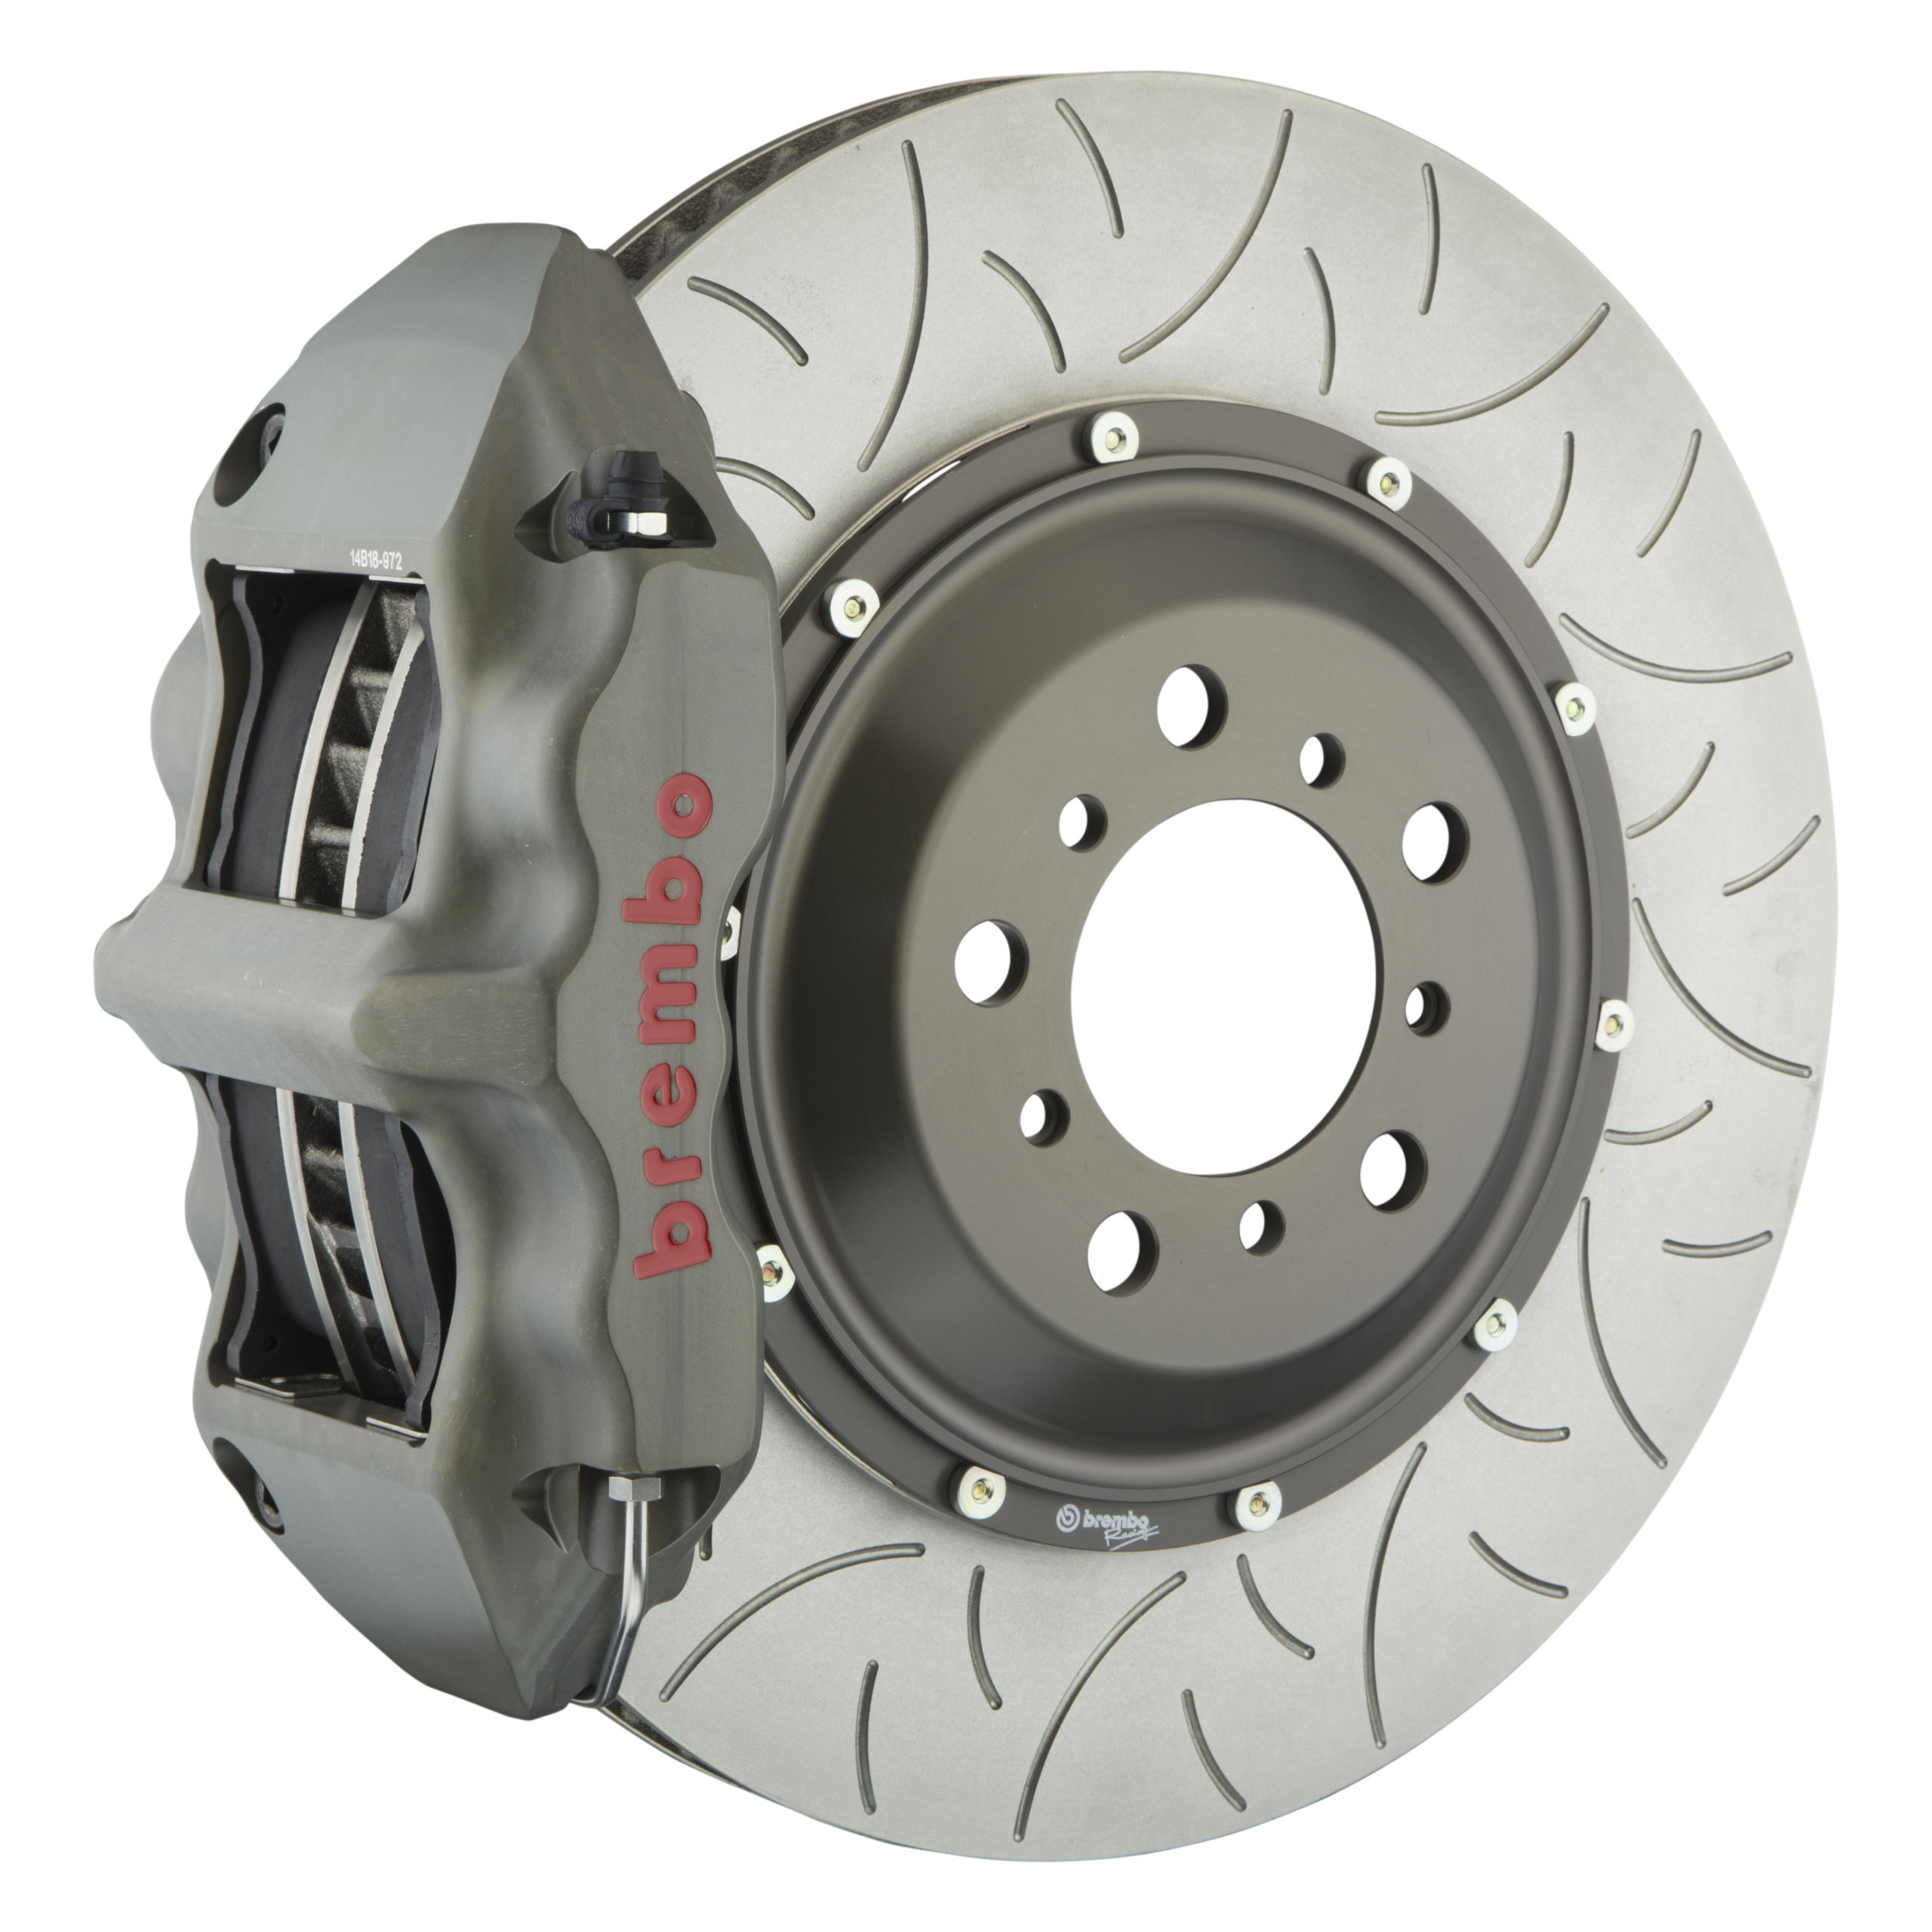 Brembo Brakes | Upgrade your braking today with the best #1